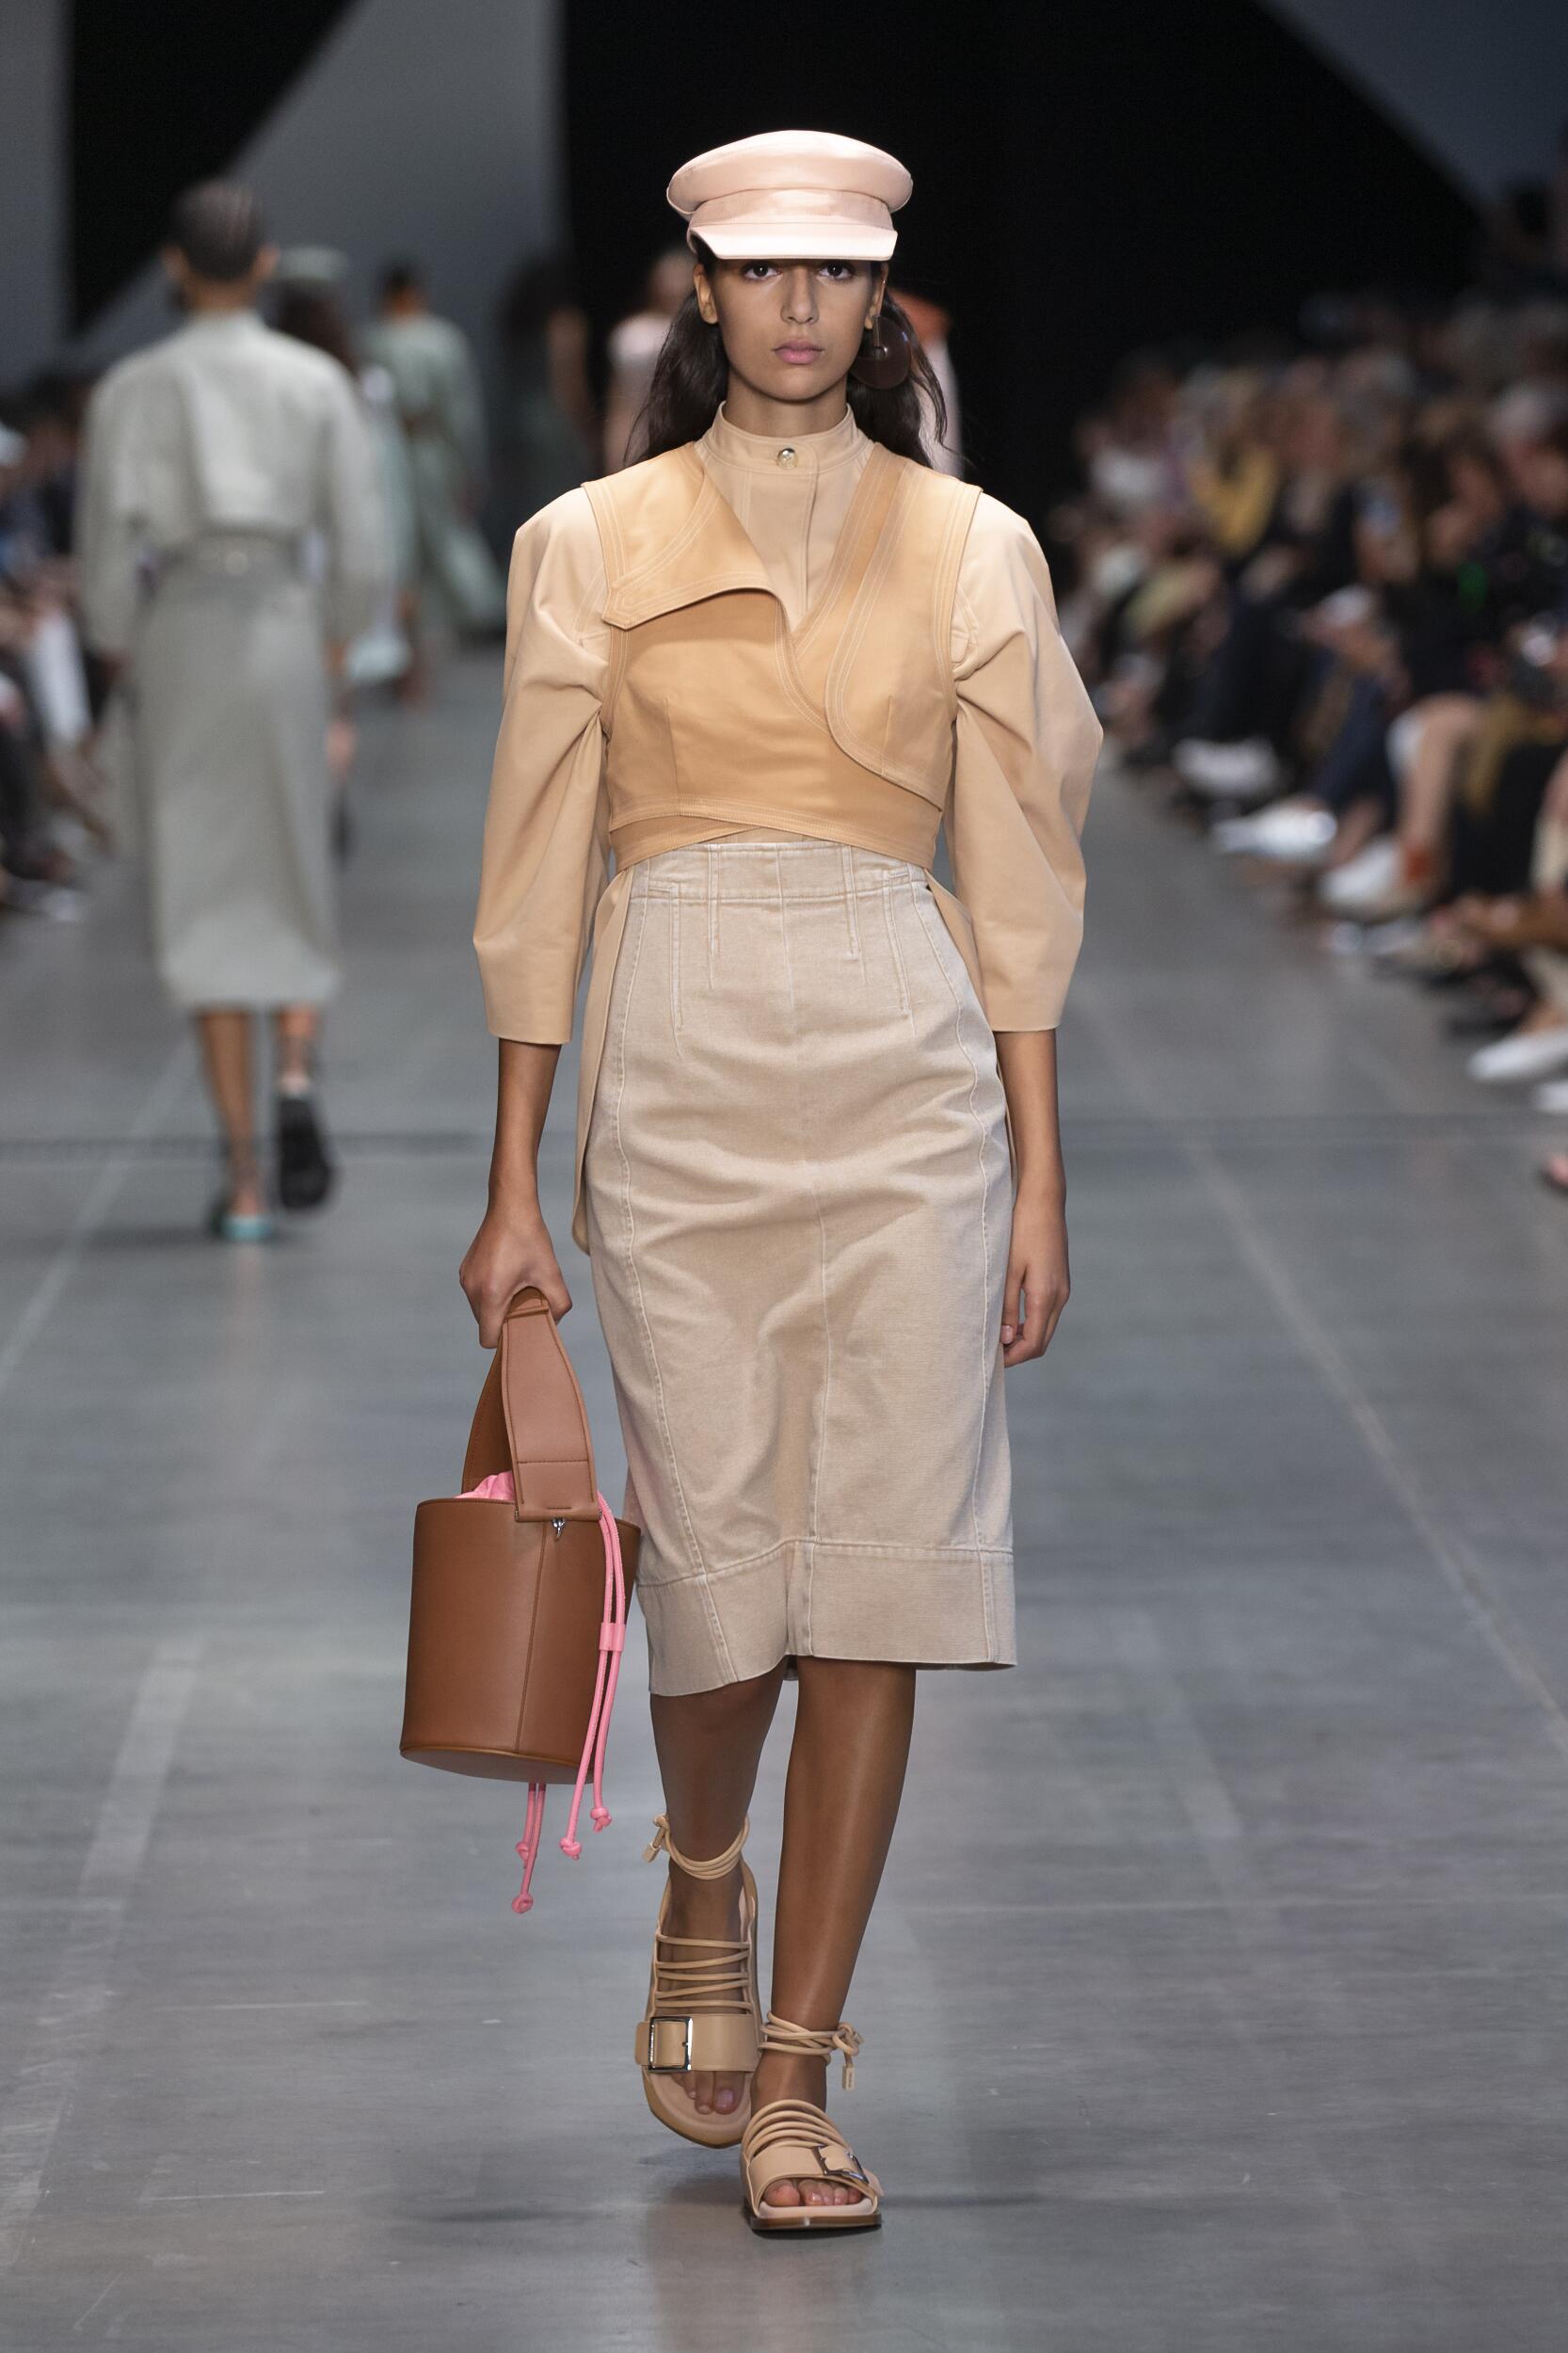 SPORTMAX SPRING SUMMER 2020 WOMEN’S COLLECTION | The ...